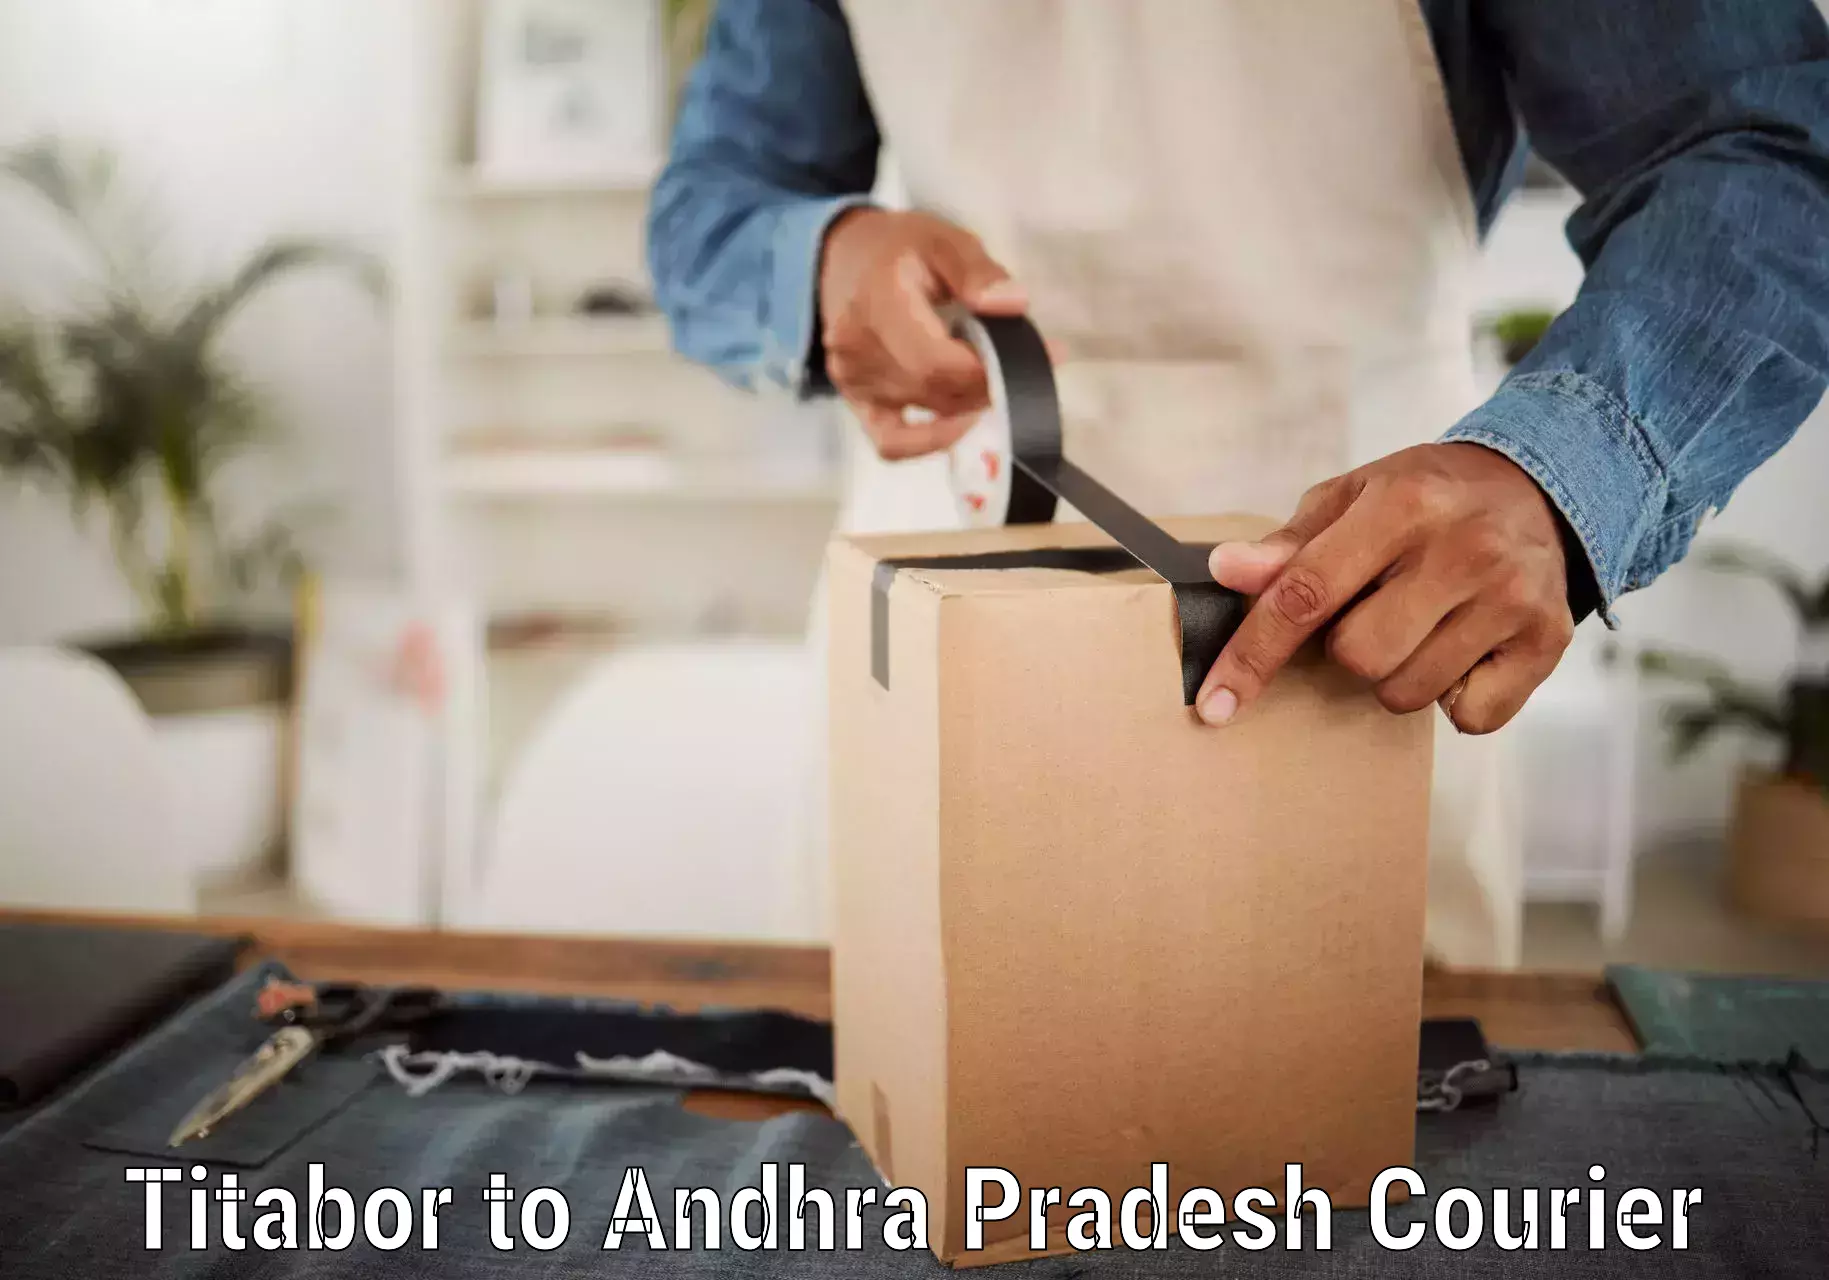 Cash on delivery service Titabor to Andhra Pradesh